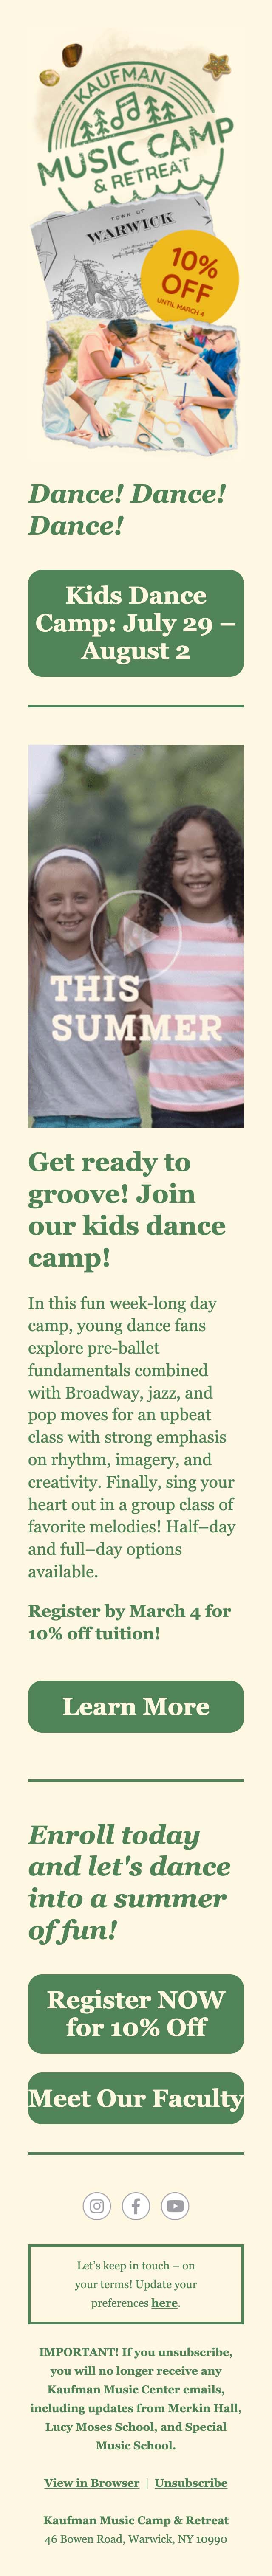 Your 10% Discount for Dance & Dalcroze Camp! - mobile view